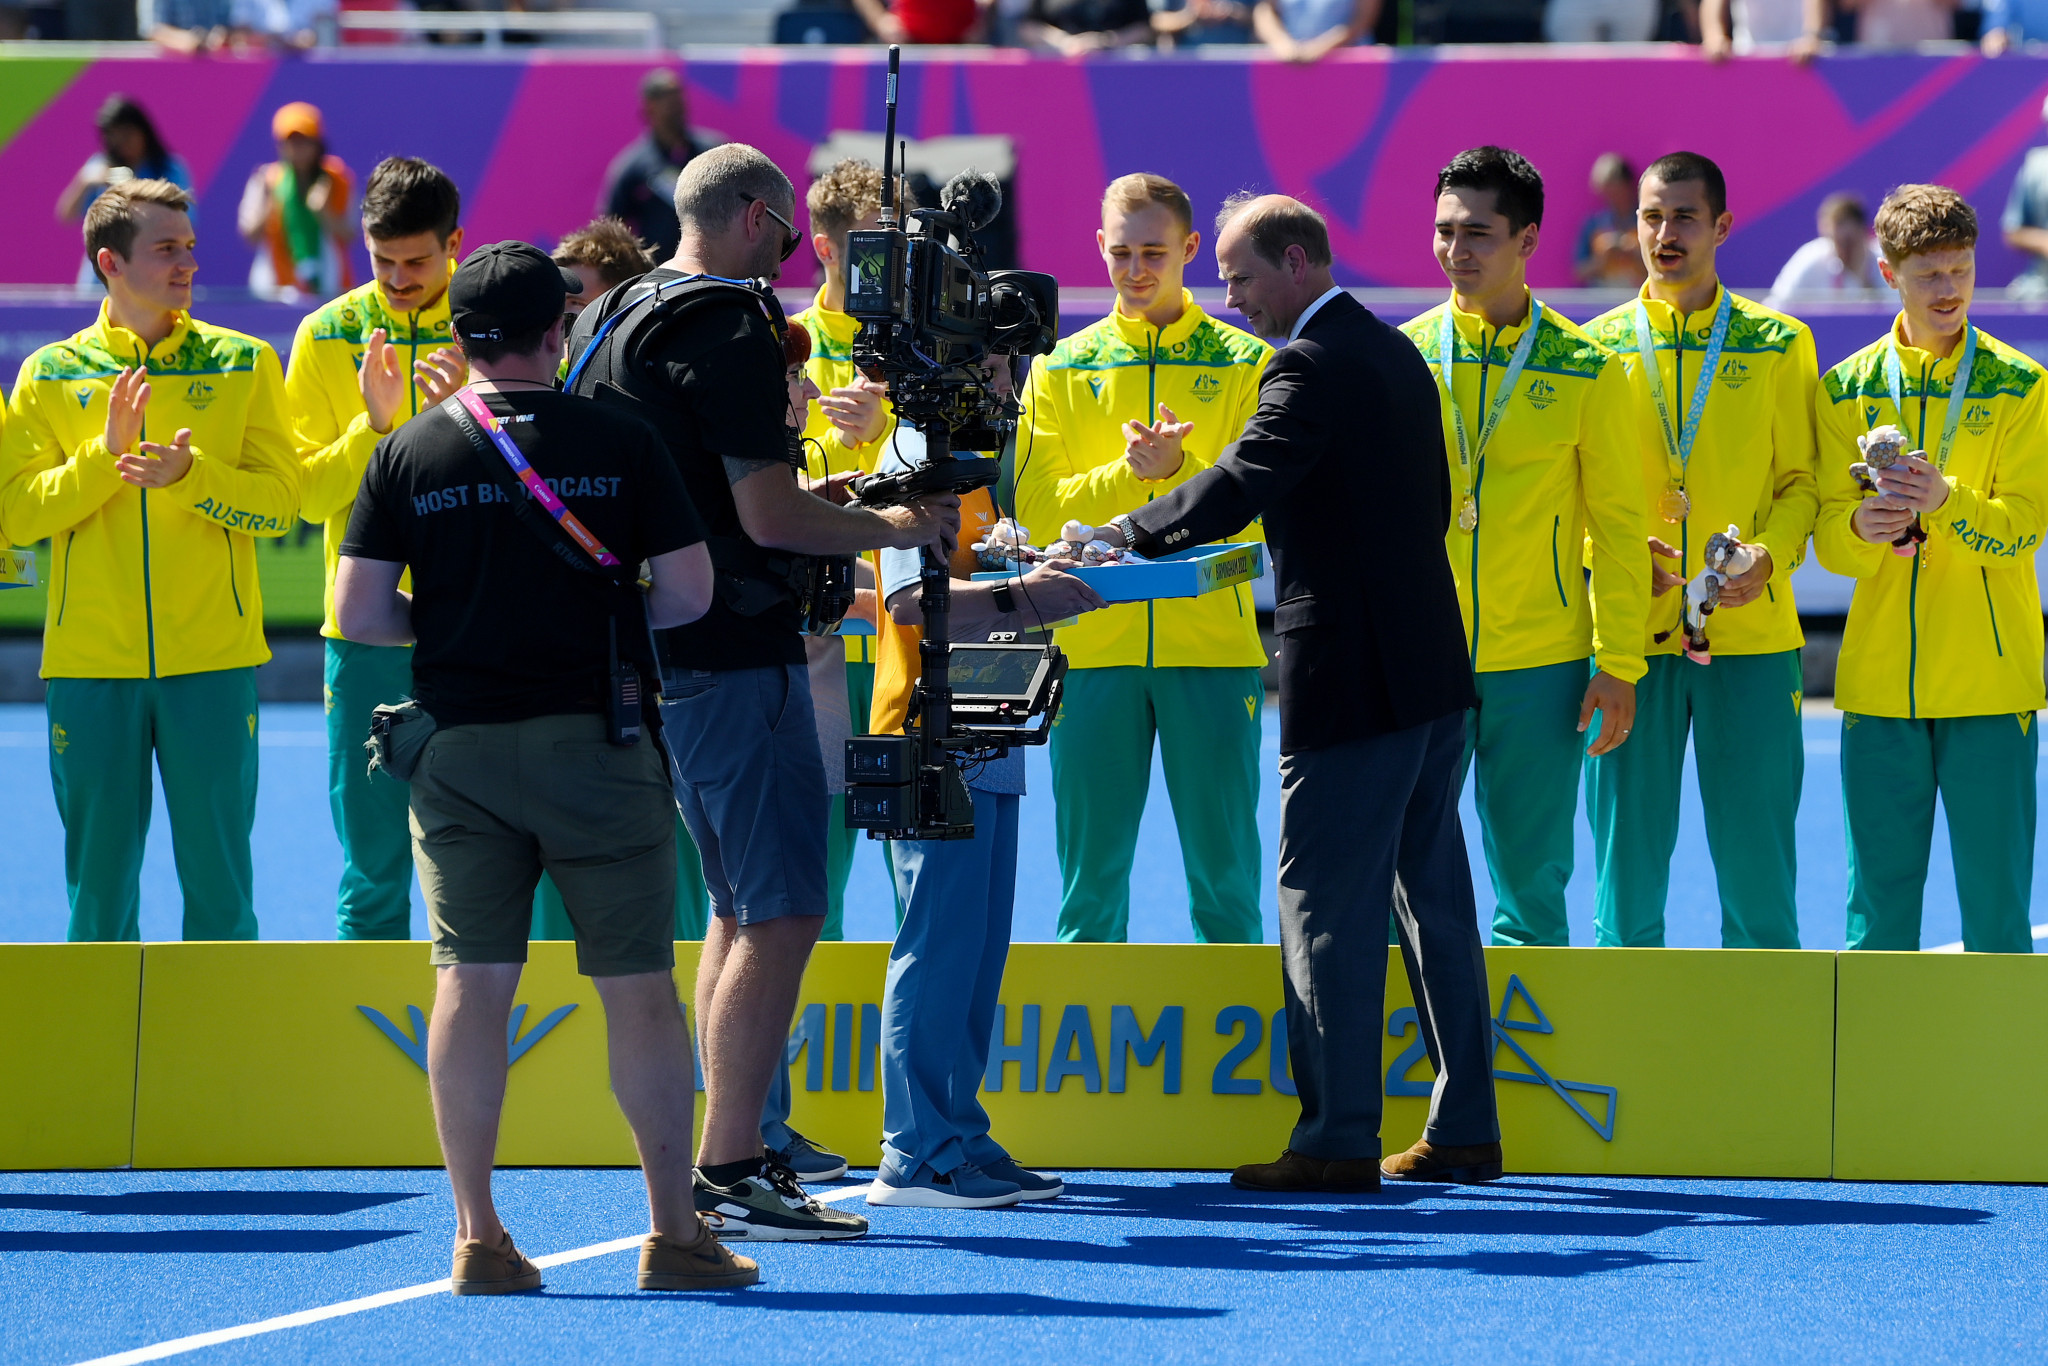 Prince Edward presented gold medals for men's hockey to Australia on the final day of Birmingham 2022 ©Getty Images